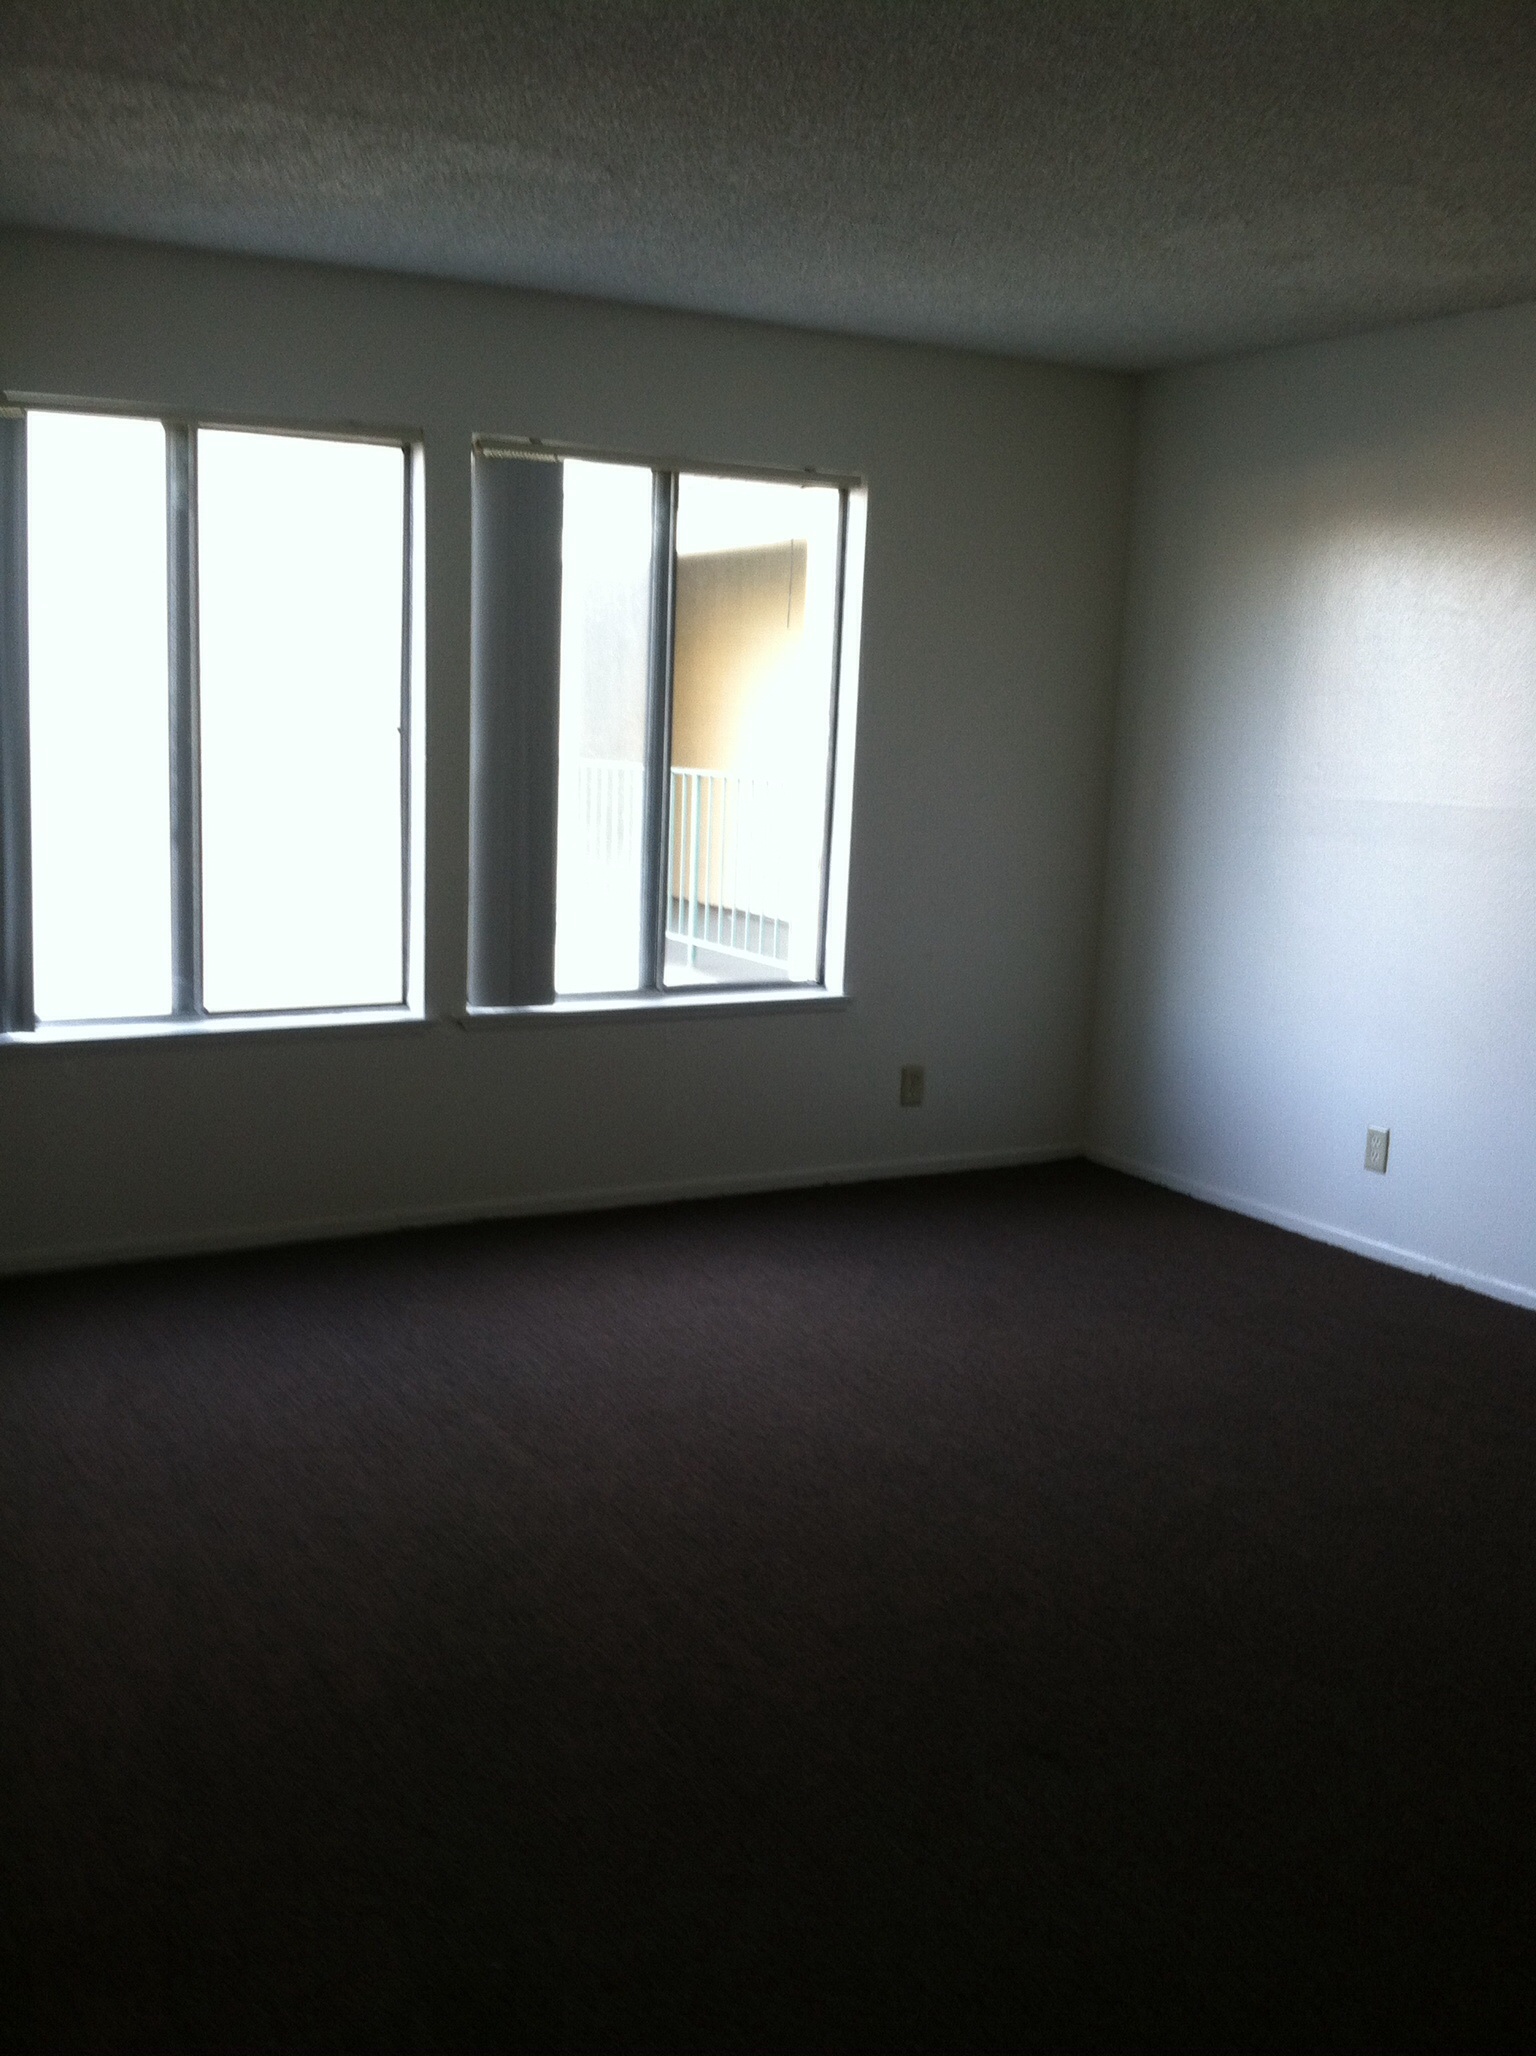 Interior view of an empty room in a unit at Ingram Preservation Properties showing two side by side large windows